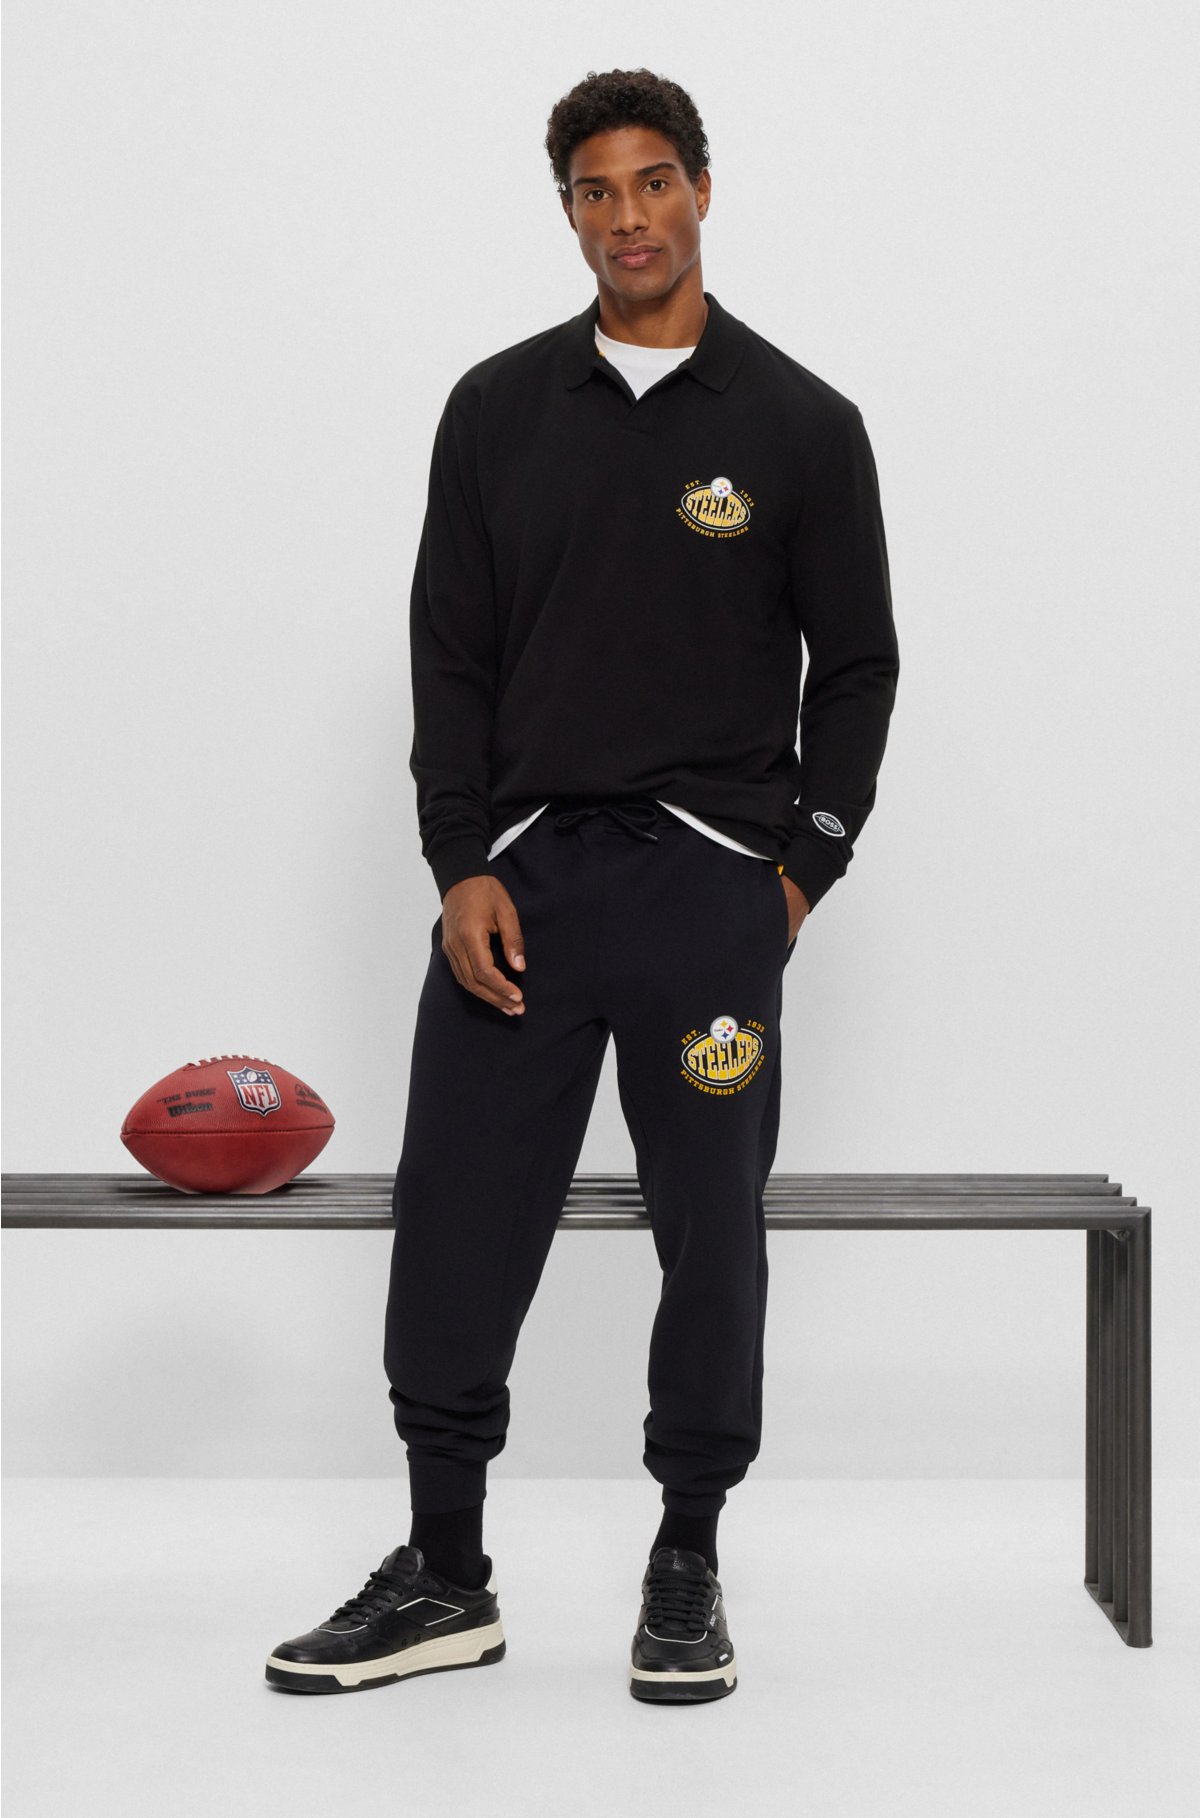 BOSS x NFL long-sleeved polo shirt with collaborative branding, Steelers